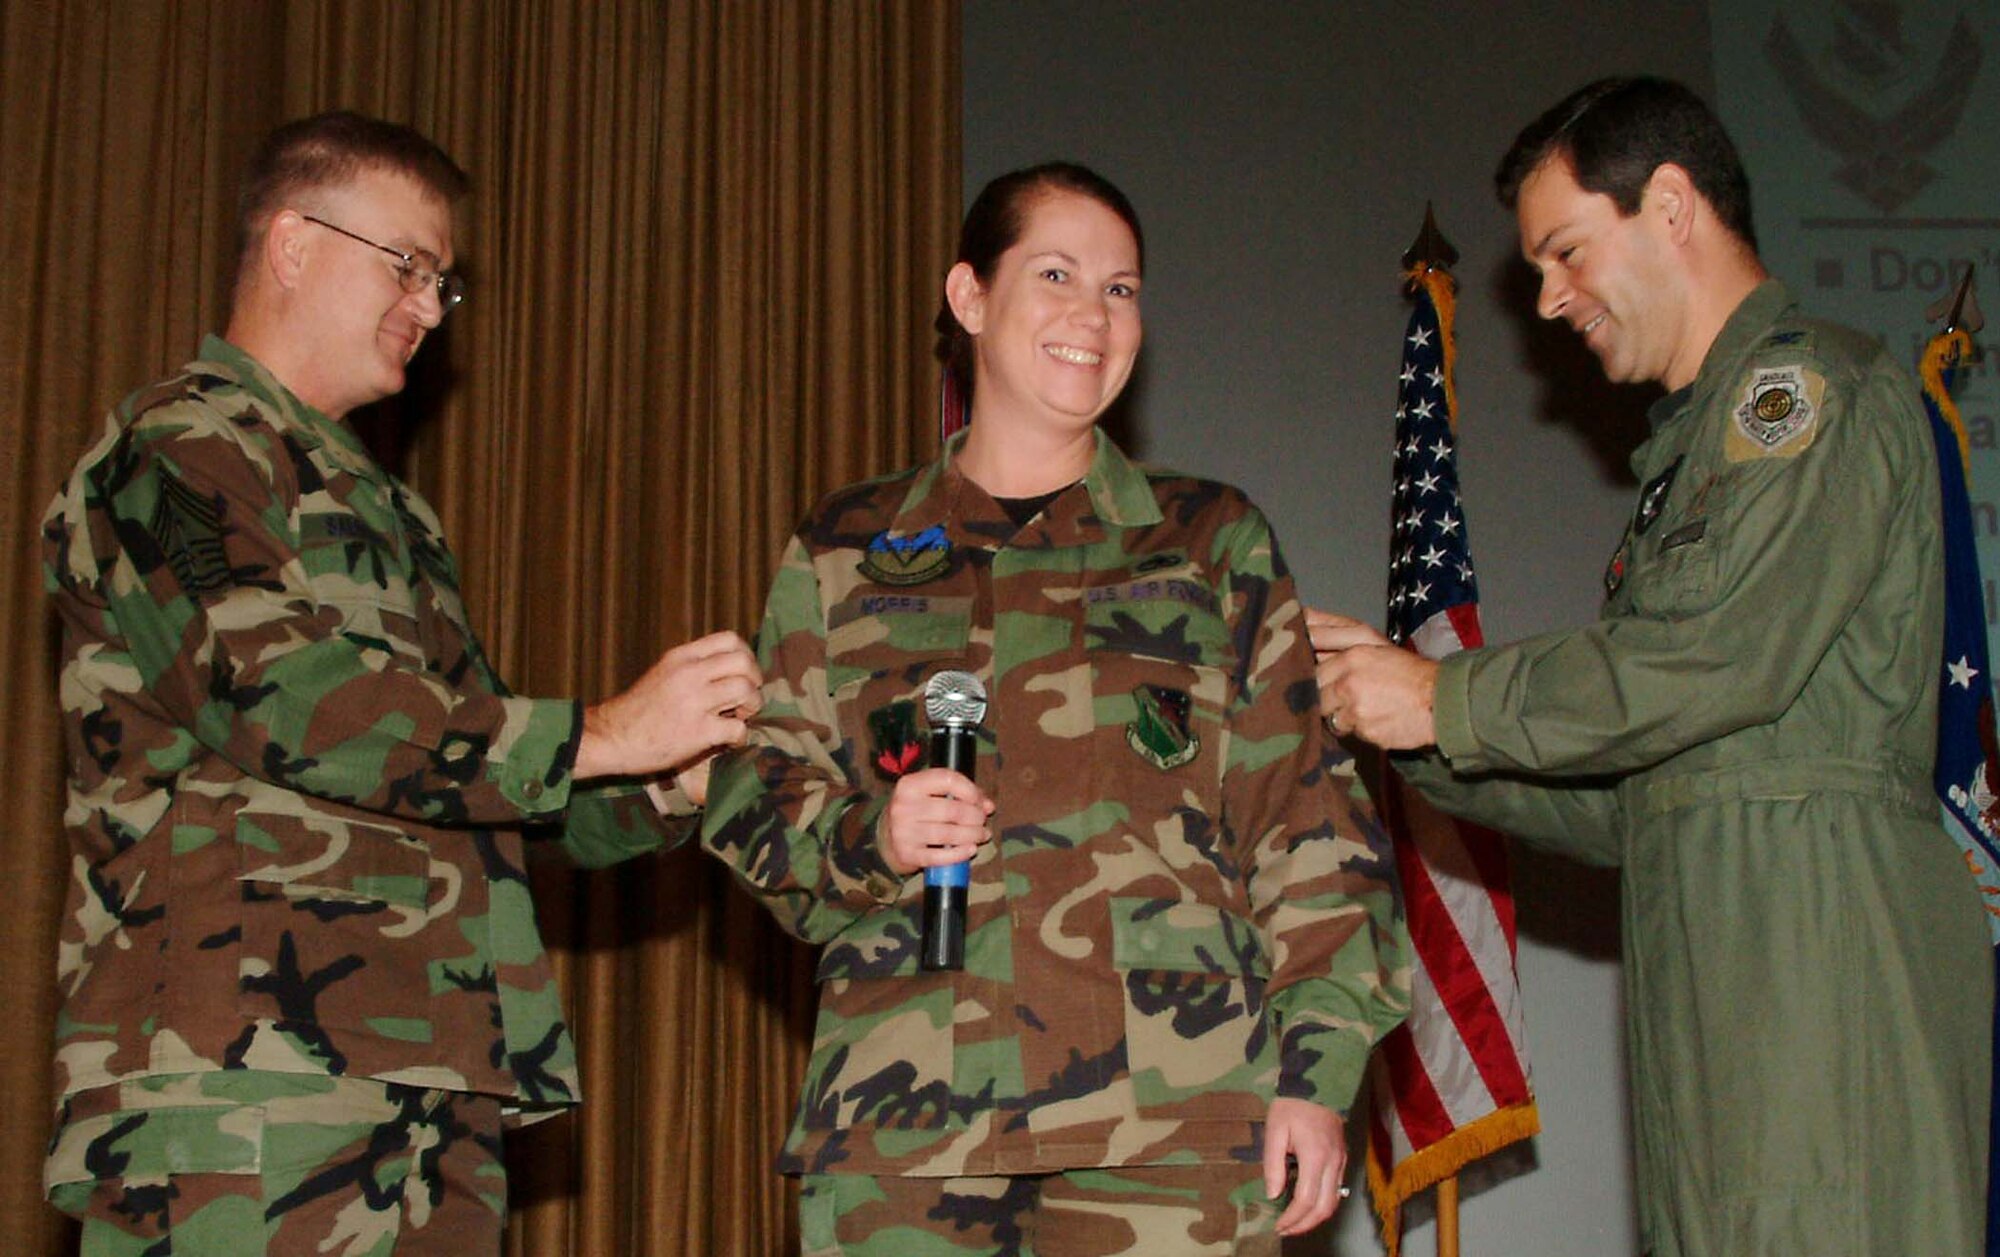 Tech. Sgt. Julie Morris, 16th Electronic Warfare Squadron, gets her new master sergeant stripes tacked on by Chief Master Sgt. Randy Salefske, 53rd Wing command chief, and Col. Ken Wilsbach, wing commander, at a commander?s call Dec. 21. 